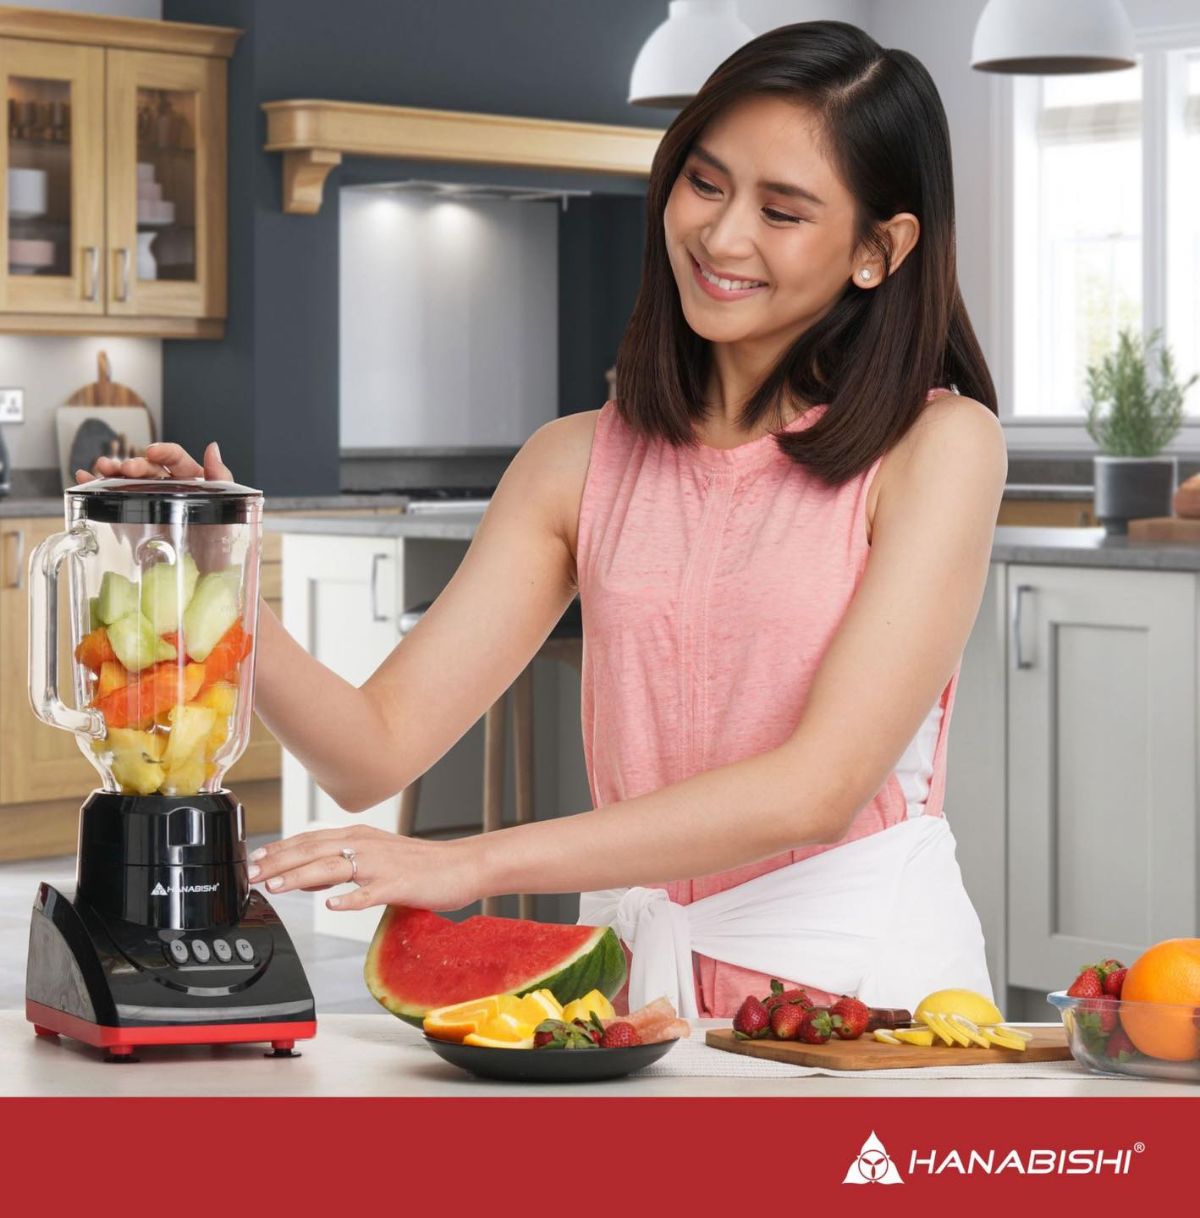 Nutrition Month Special: 3 Healthy Recipes For Better Nutrition 